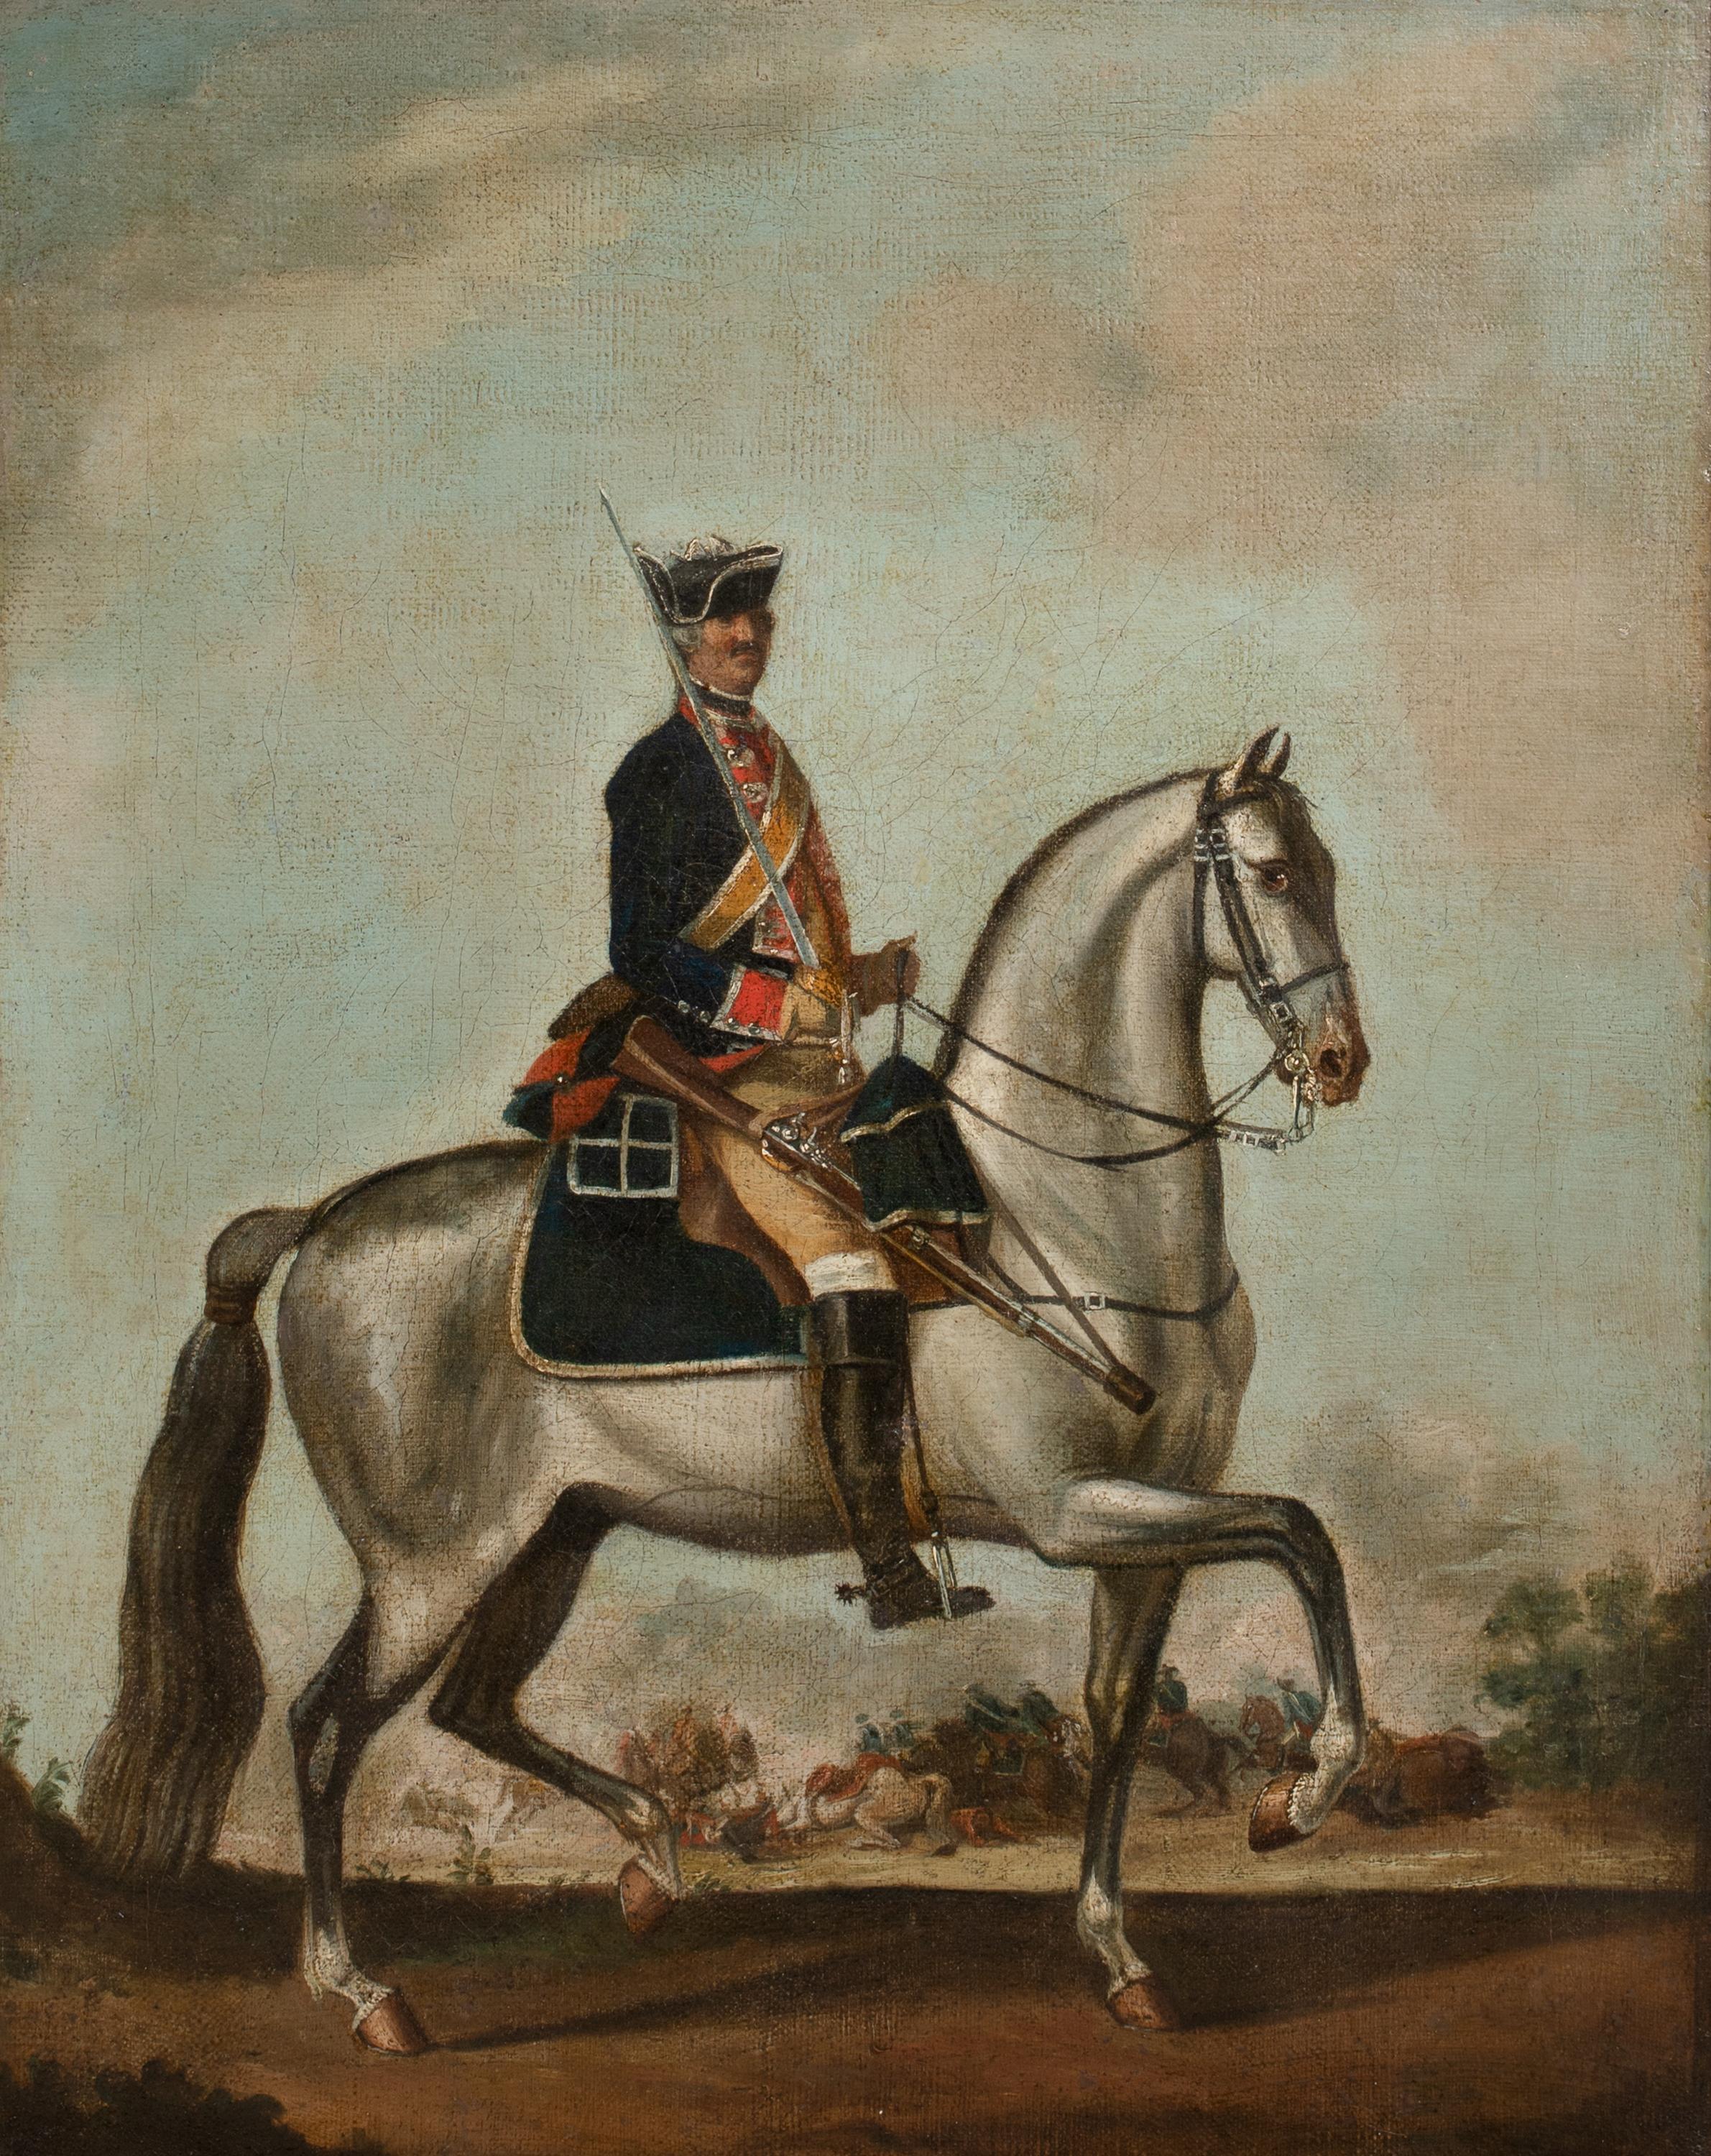 Officer & Horse Of The Royal Queens Dragoons, Seven Years War (1756-1763). 18th Century

by David MORIER (1704-1770) 

Large circa 1760 portrait of an officer and horse of the Royal Queens Dragoon, oil on canvas by David Morier. Excellent and